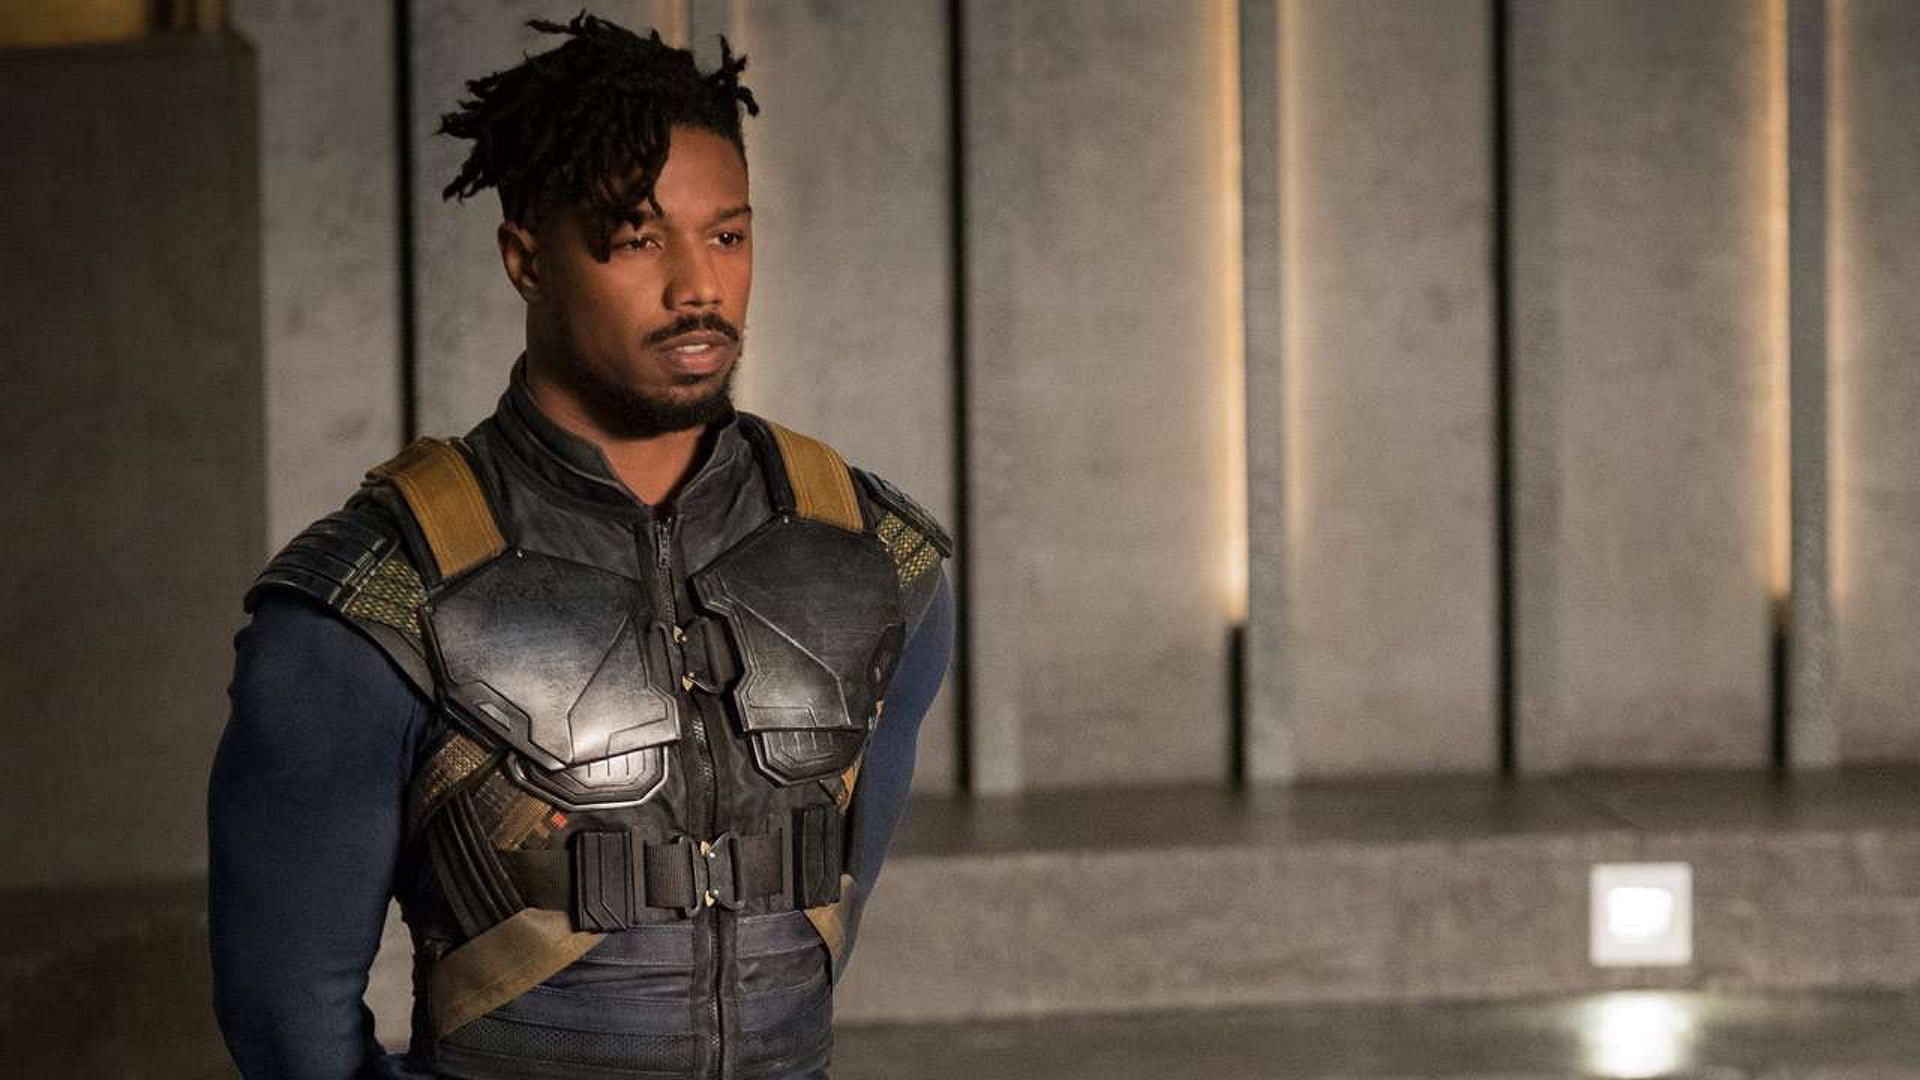 Michael B. Jordan as Erik Killmonger, the charismatic and complex villain in Black Panther, one of the most captivating antagonists in the Marvel Cinematic Universe (Image via Marvel Studios)